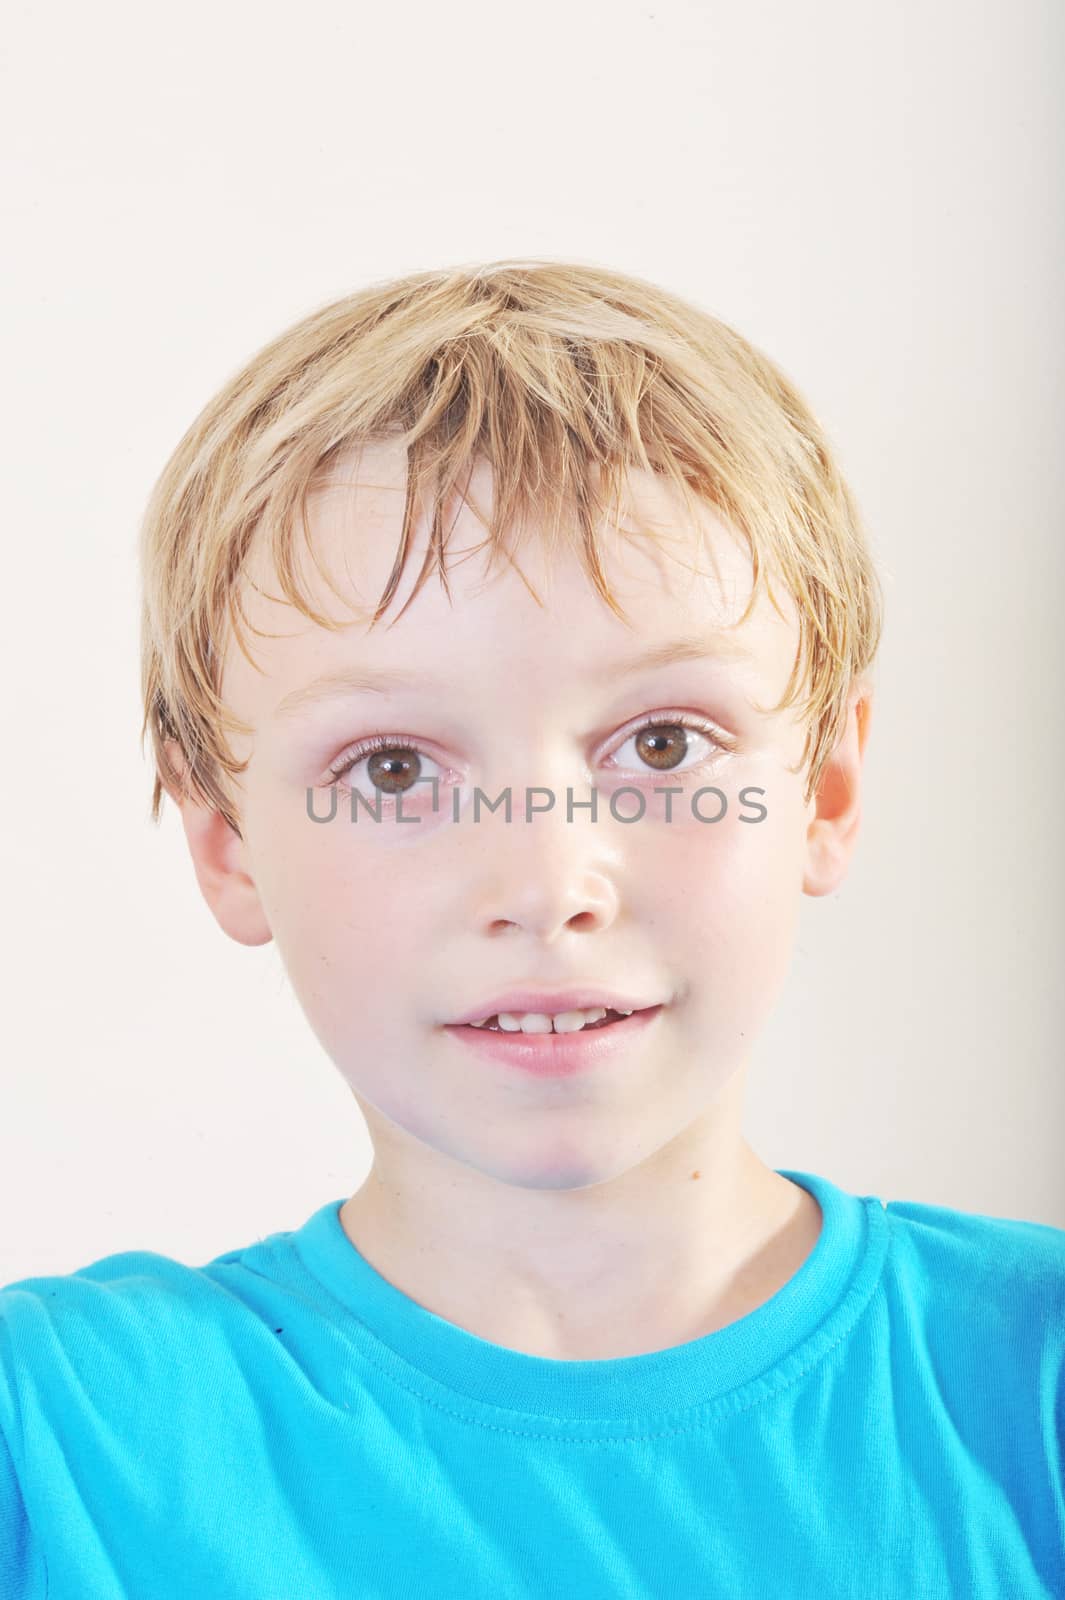 Portrait of a young five year old boy
